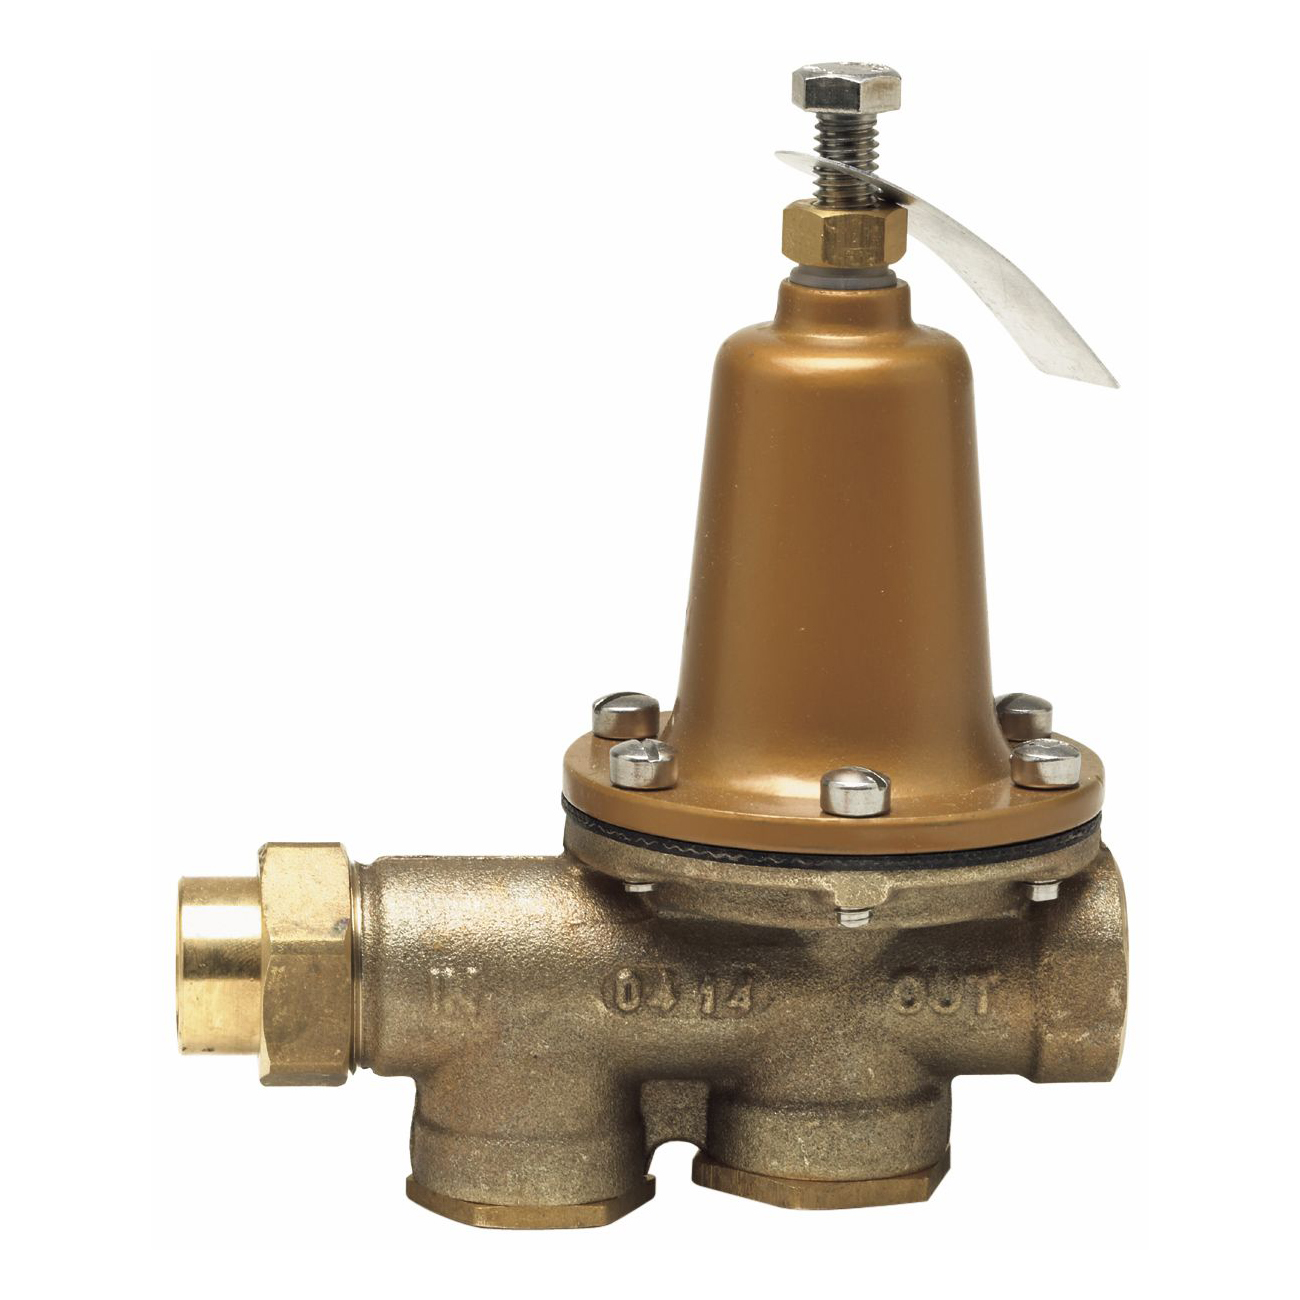 WATTS® 0009257 LF25AUB-Z3 Pressure Reducing Valve, 3/4 in Nominal, FNPT Union x FNPT End Style, 25 to 75 psi Pressure, Cast Copper Silicon Alloy Body, Import